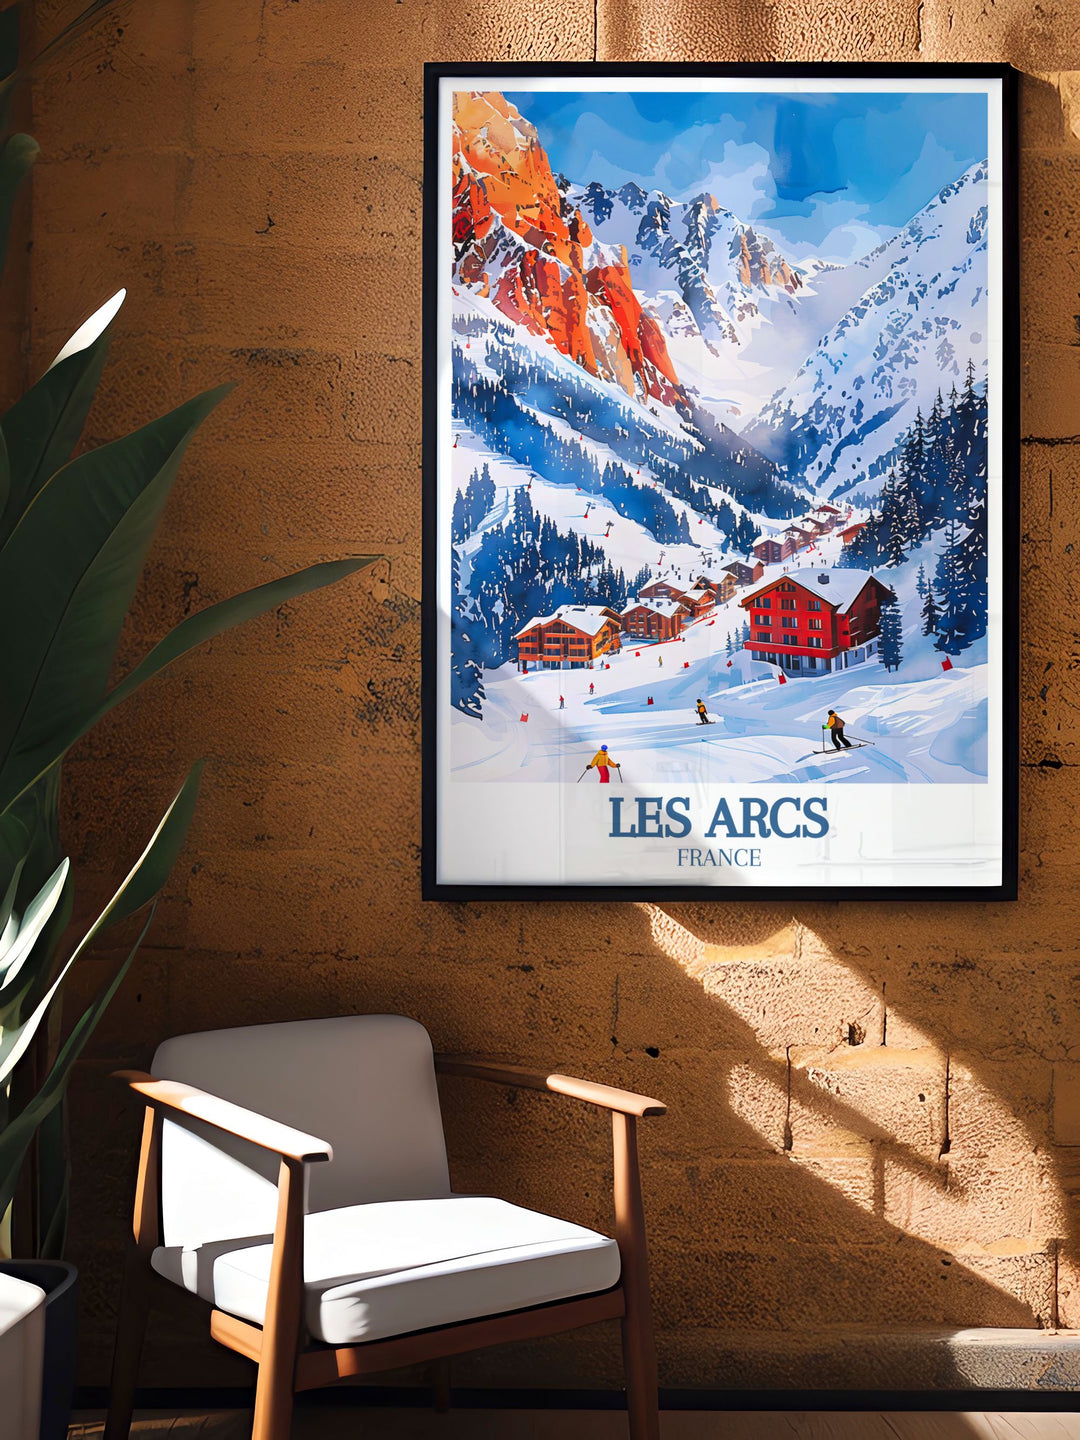 Stunning Les Arcs print with Aiguille Rouge Mont Blanc ideal for adding a touch of vintage ski poster charm to your living room or office and celebrating the thrill of skiing